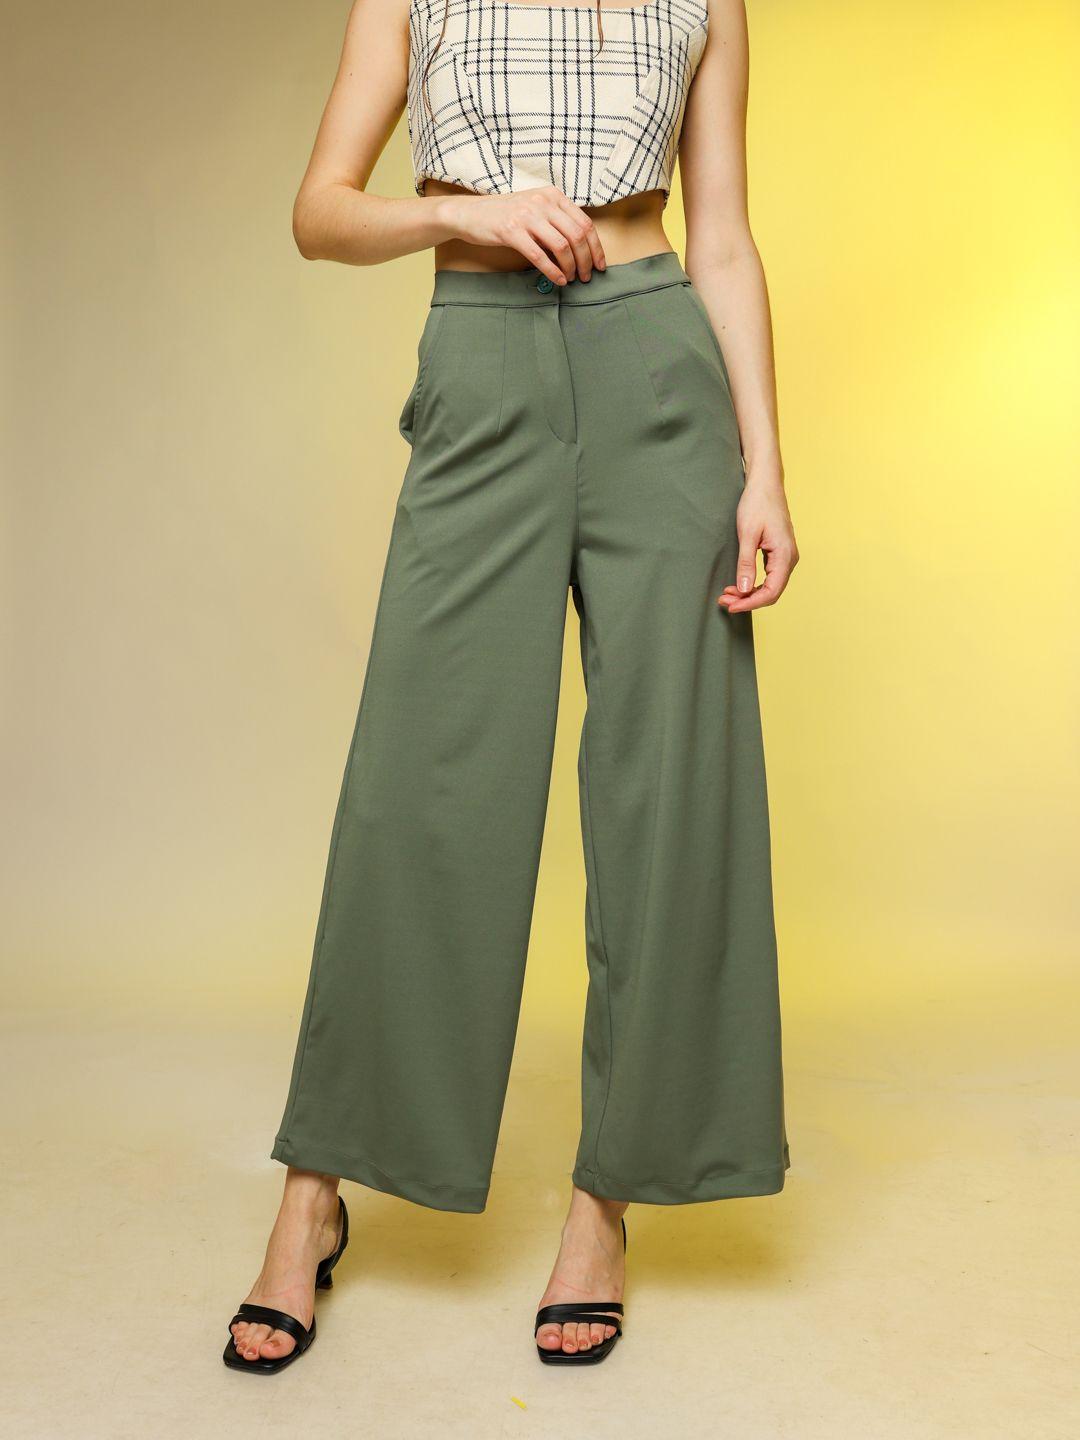 stylecast x hersheinbox women solid trousers